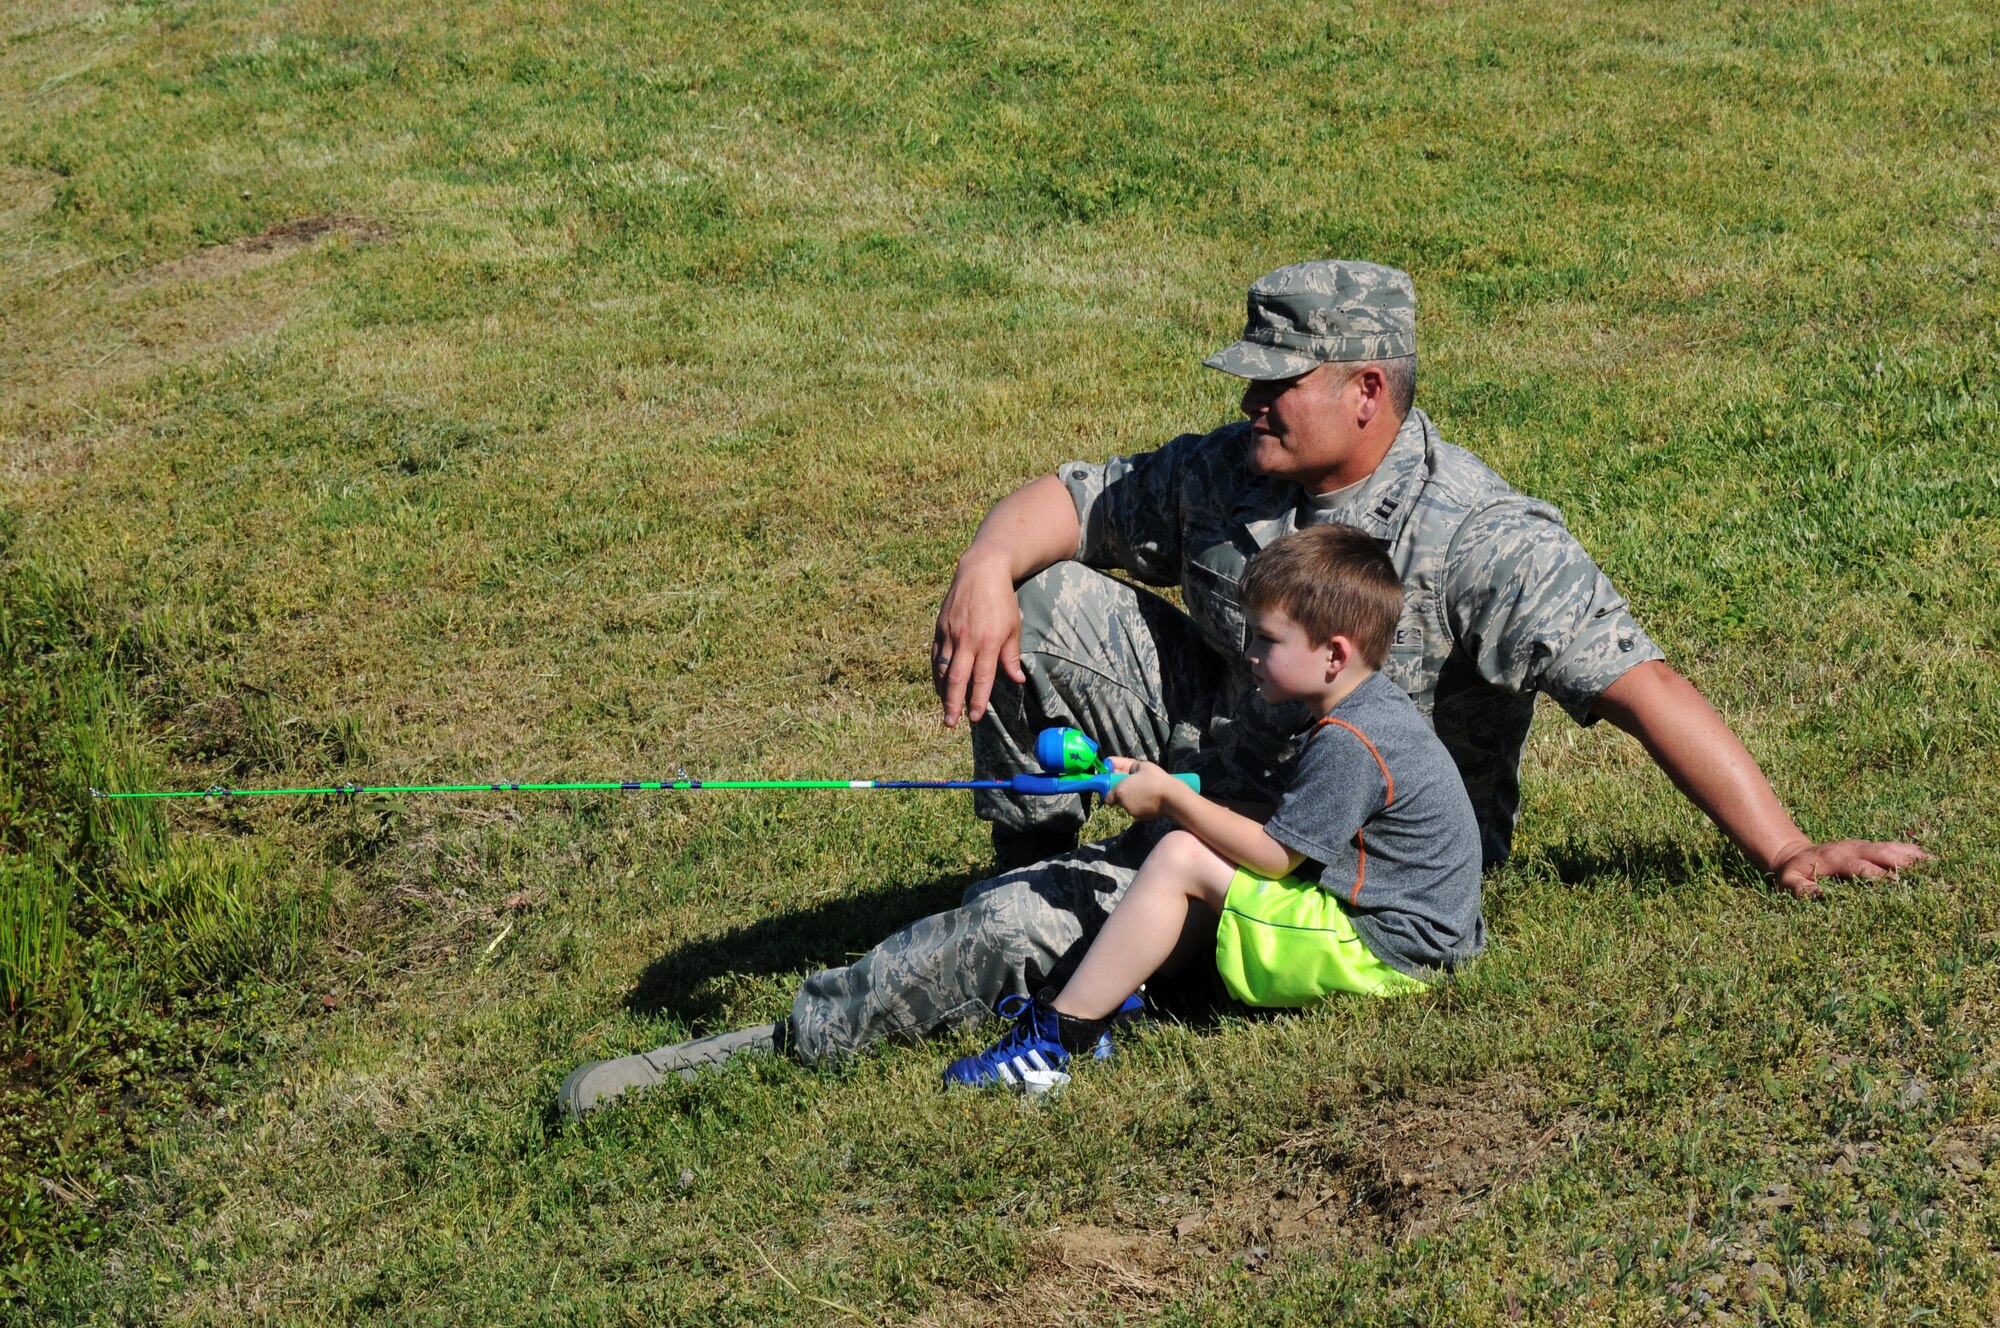 Airmen with the 188th Fighter Wing along their family members participated in the inaugural youth fishing derby following the wing’s 2nd annual Hawg Jawg 5K at Ebbing Air National Guard Base, Fort Smith, Arkansas, May 3, 2014. (U.S. Air National Guard photo by Airman First Class Cody Martin/Released)